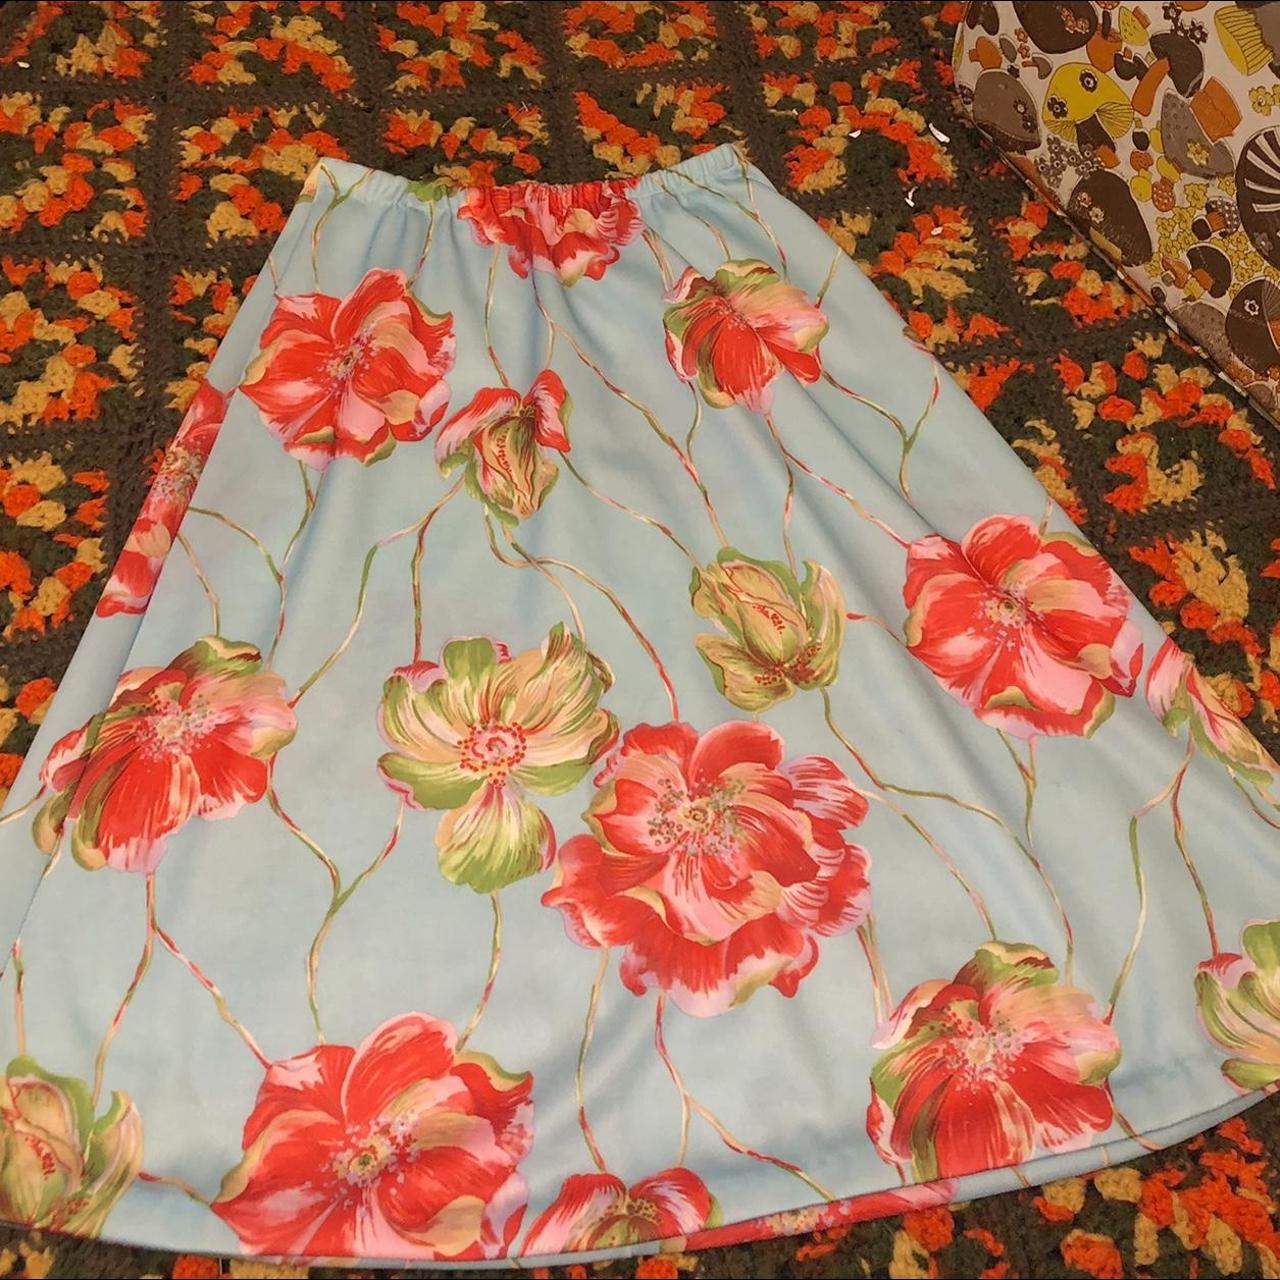 Product Image 1 - Authentic Vintage 70s Floral Skirt!